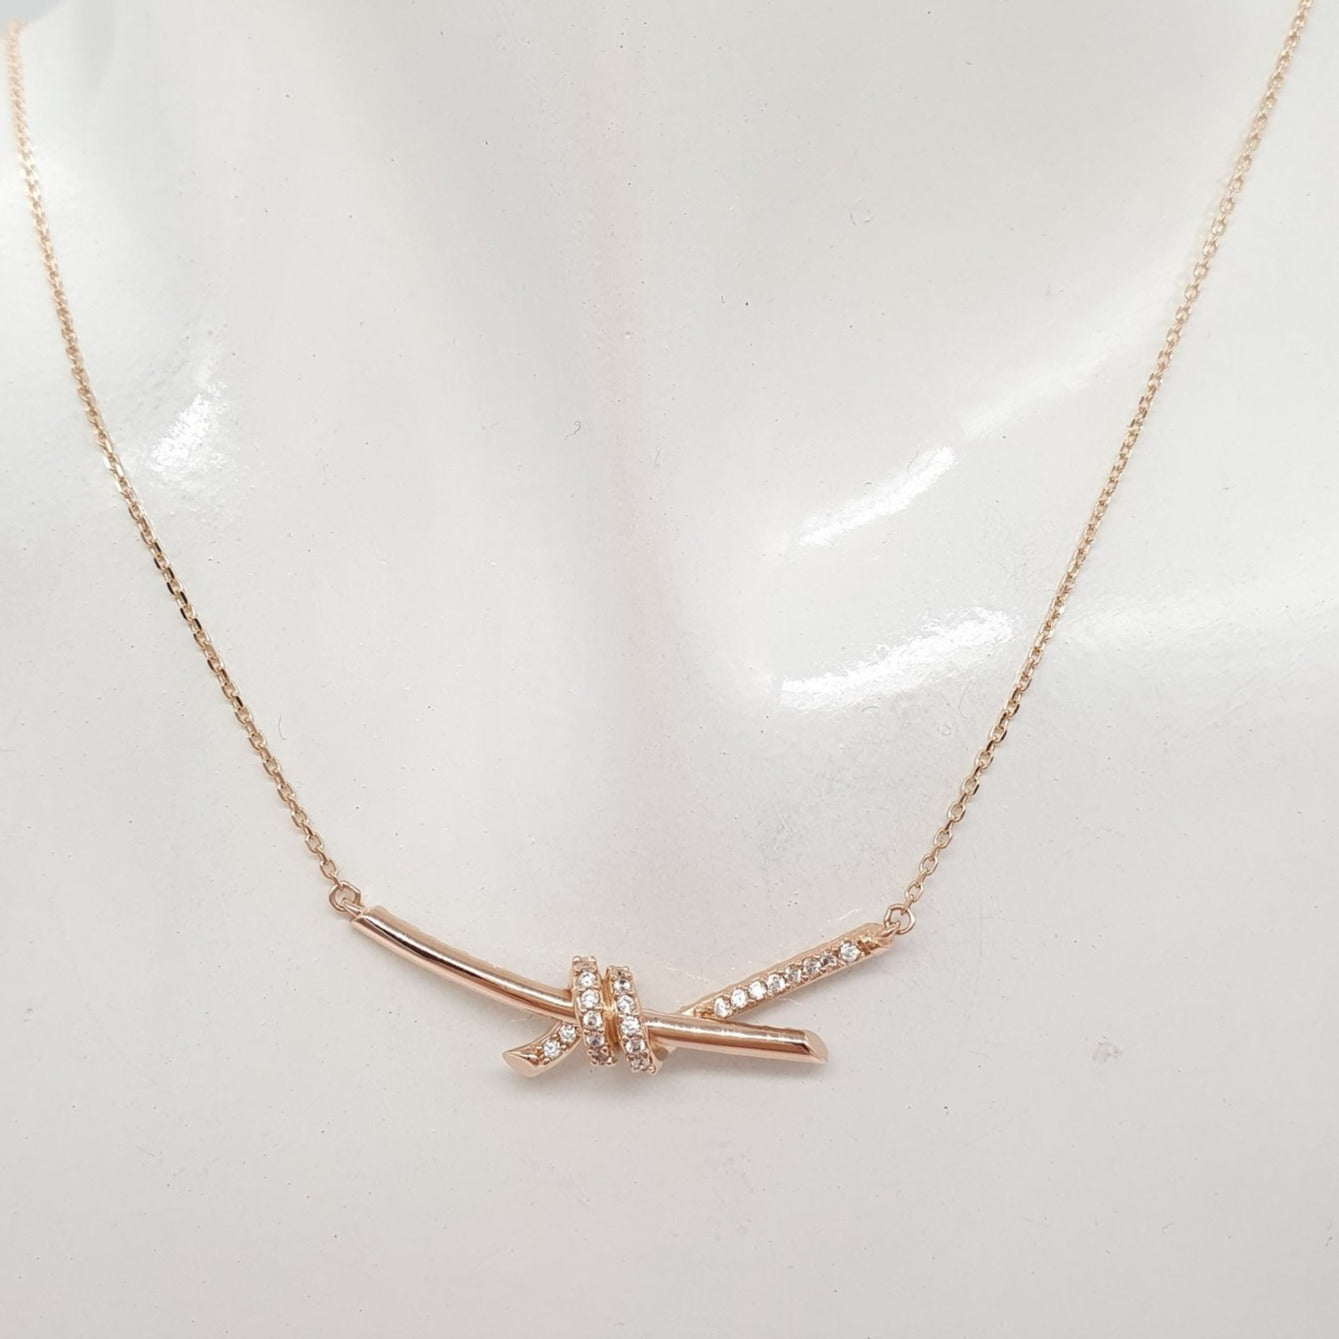 Fashionable Bar Knot Necklace 18K Gold